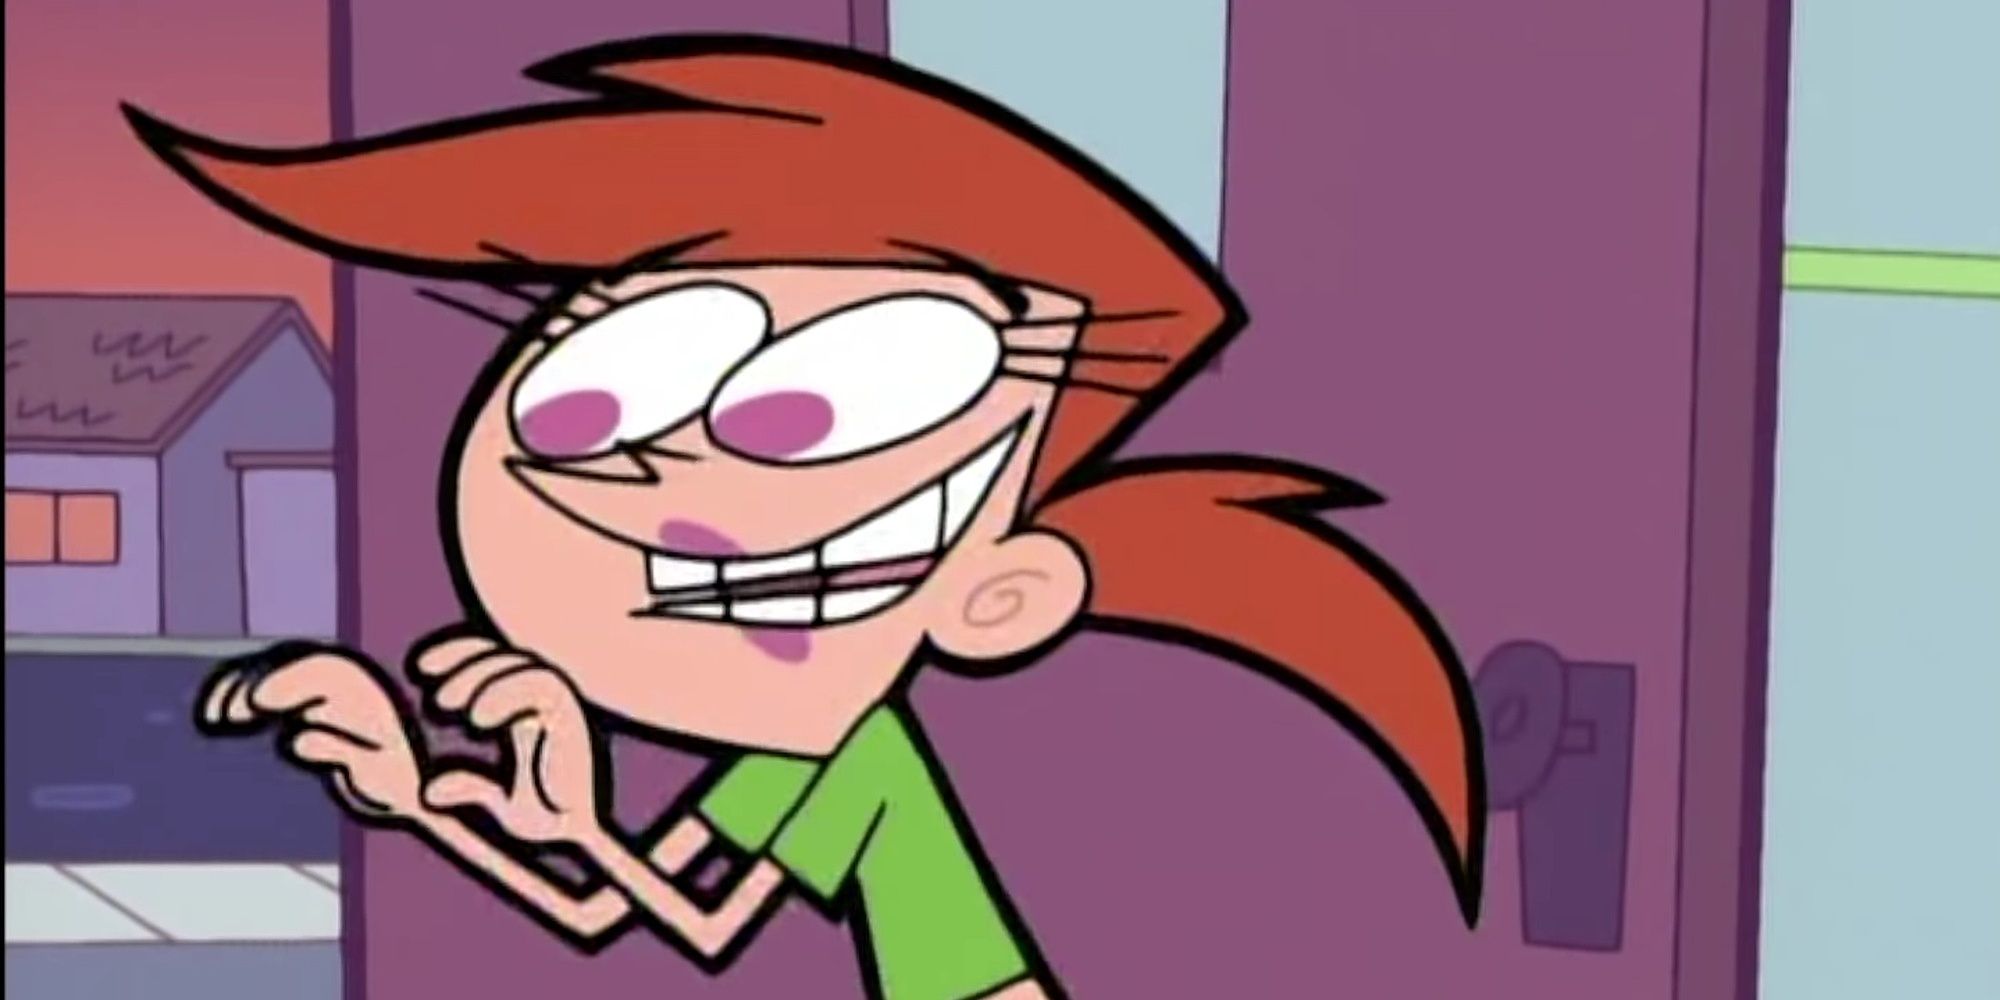 Vicky as she appears in The Fairly OddParents